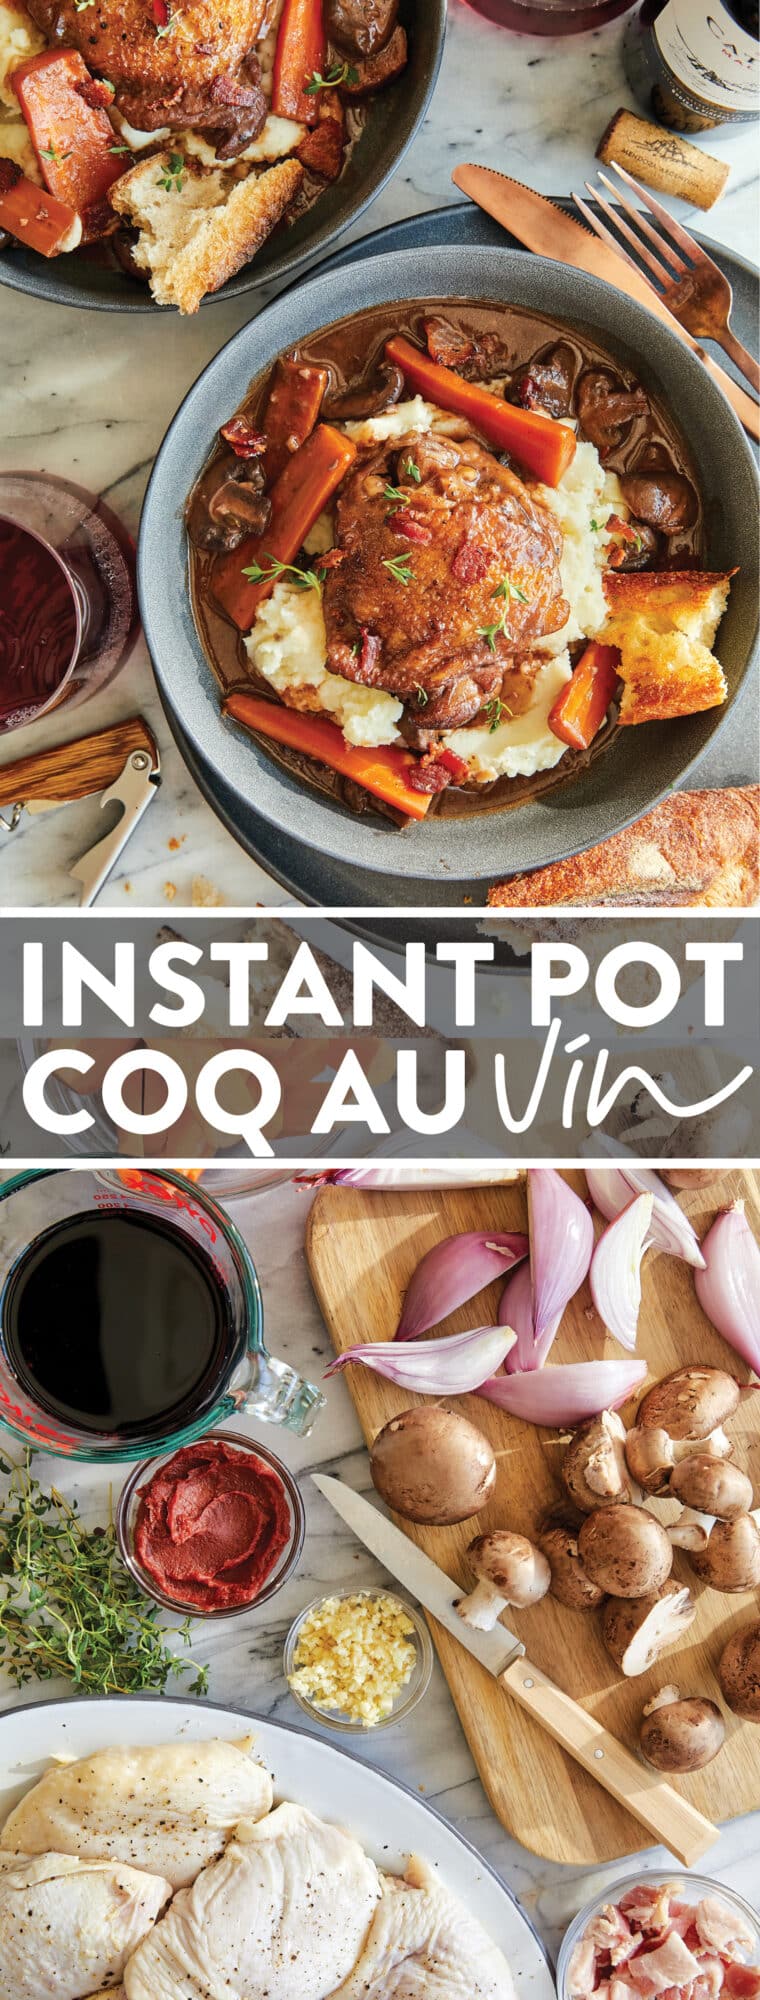 Instant Pot Coq Au Vin - Oh-so-perfect silky-tender chicken and veggies cooked in a red wine sauce in just a fraction of the time. SO GOOD!